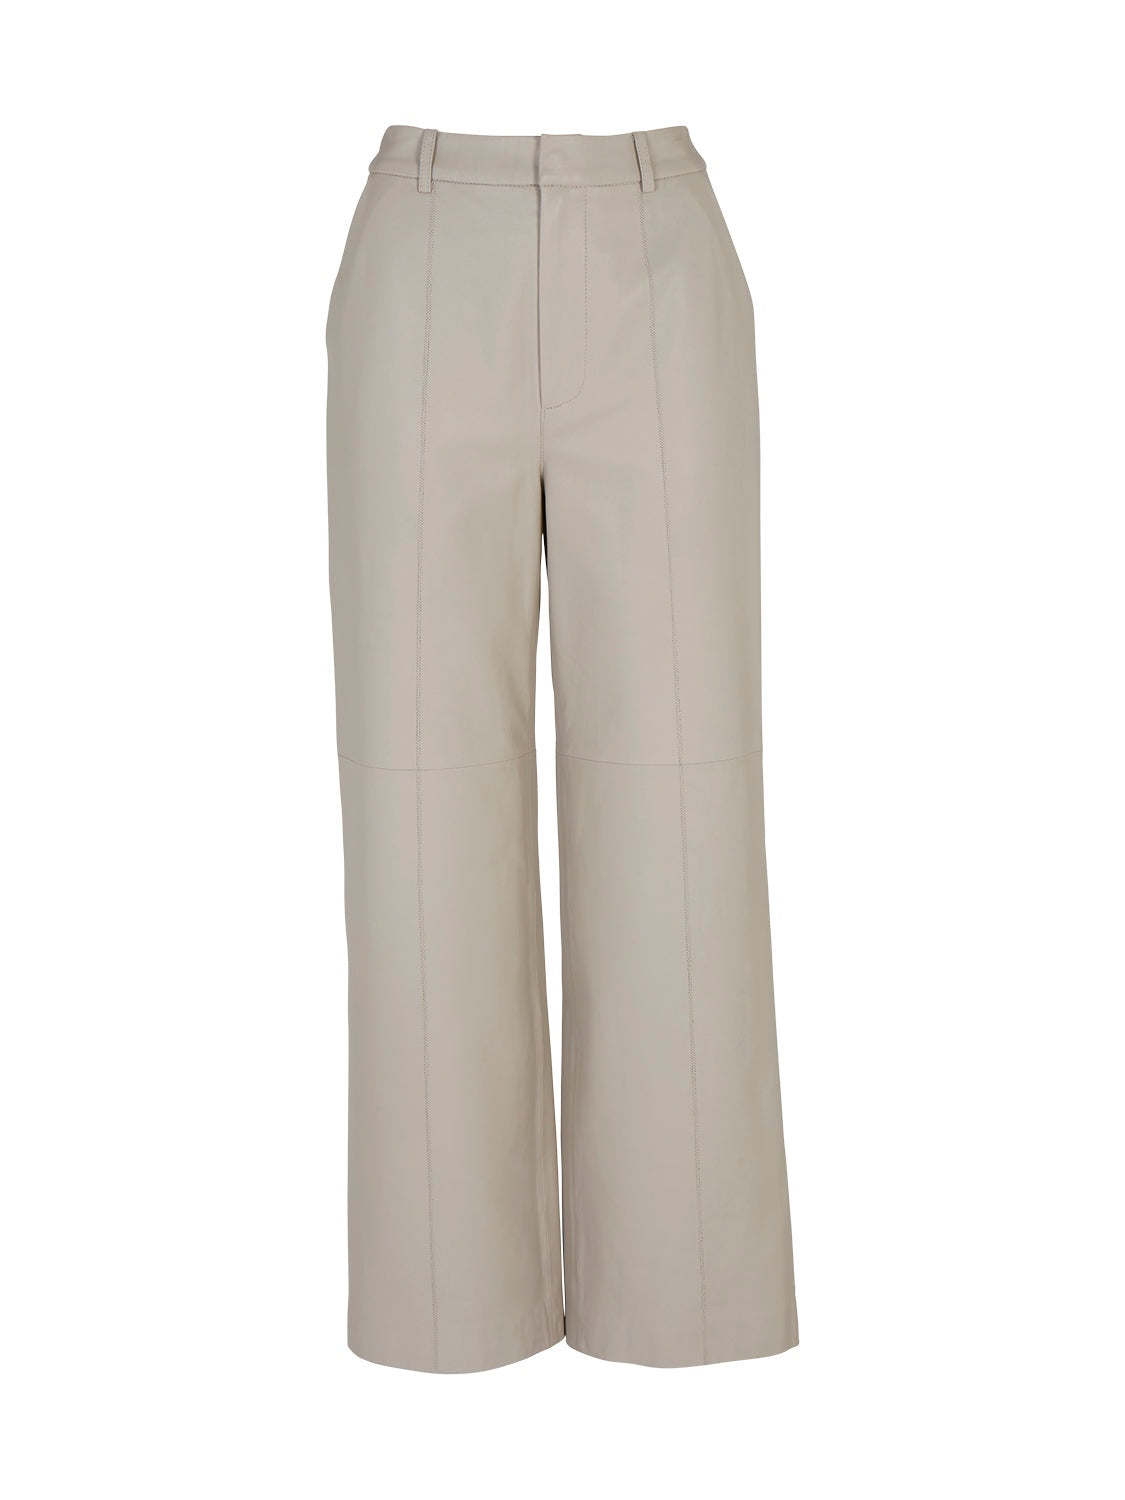 Stanford Leather Pant - Turtle Dove